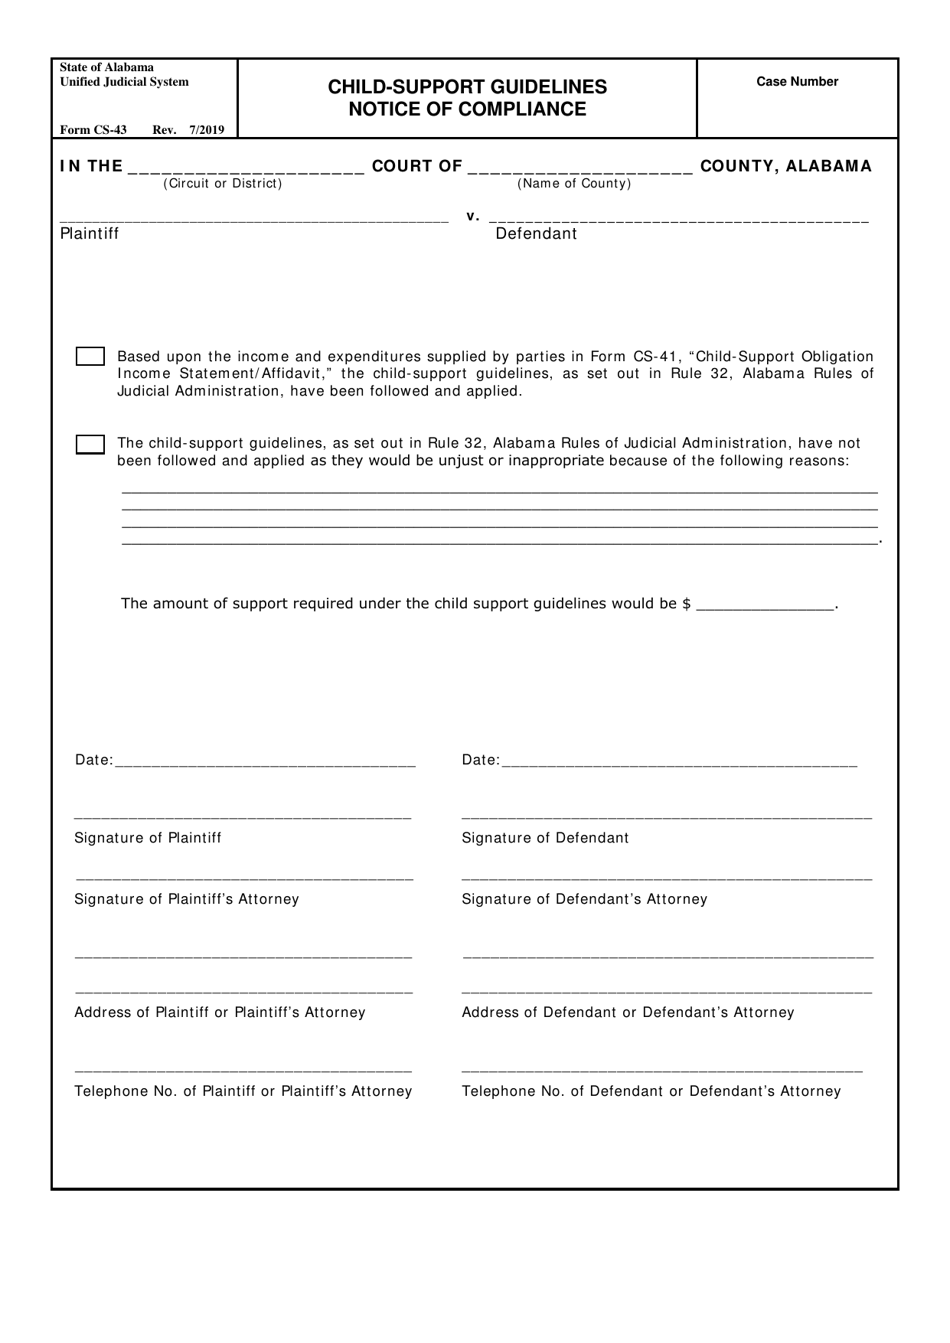 Form CS-43 Child-Support Guidelines Notice of Compliance - Alabama, Page 1